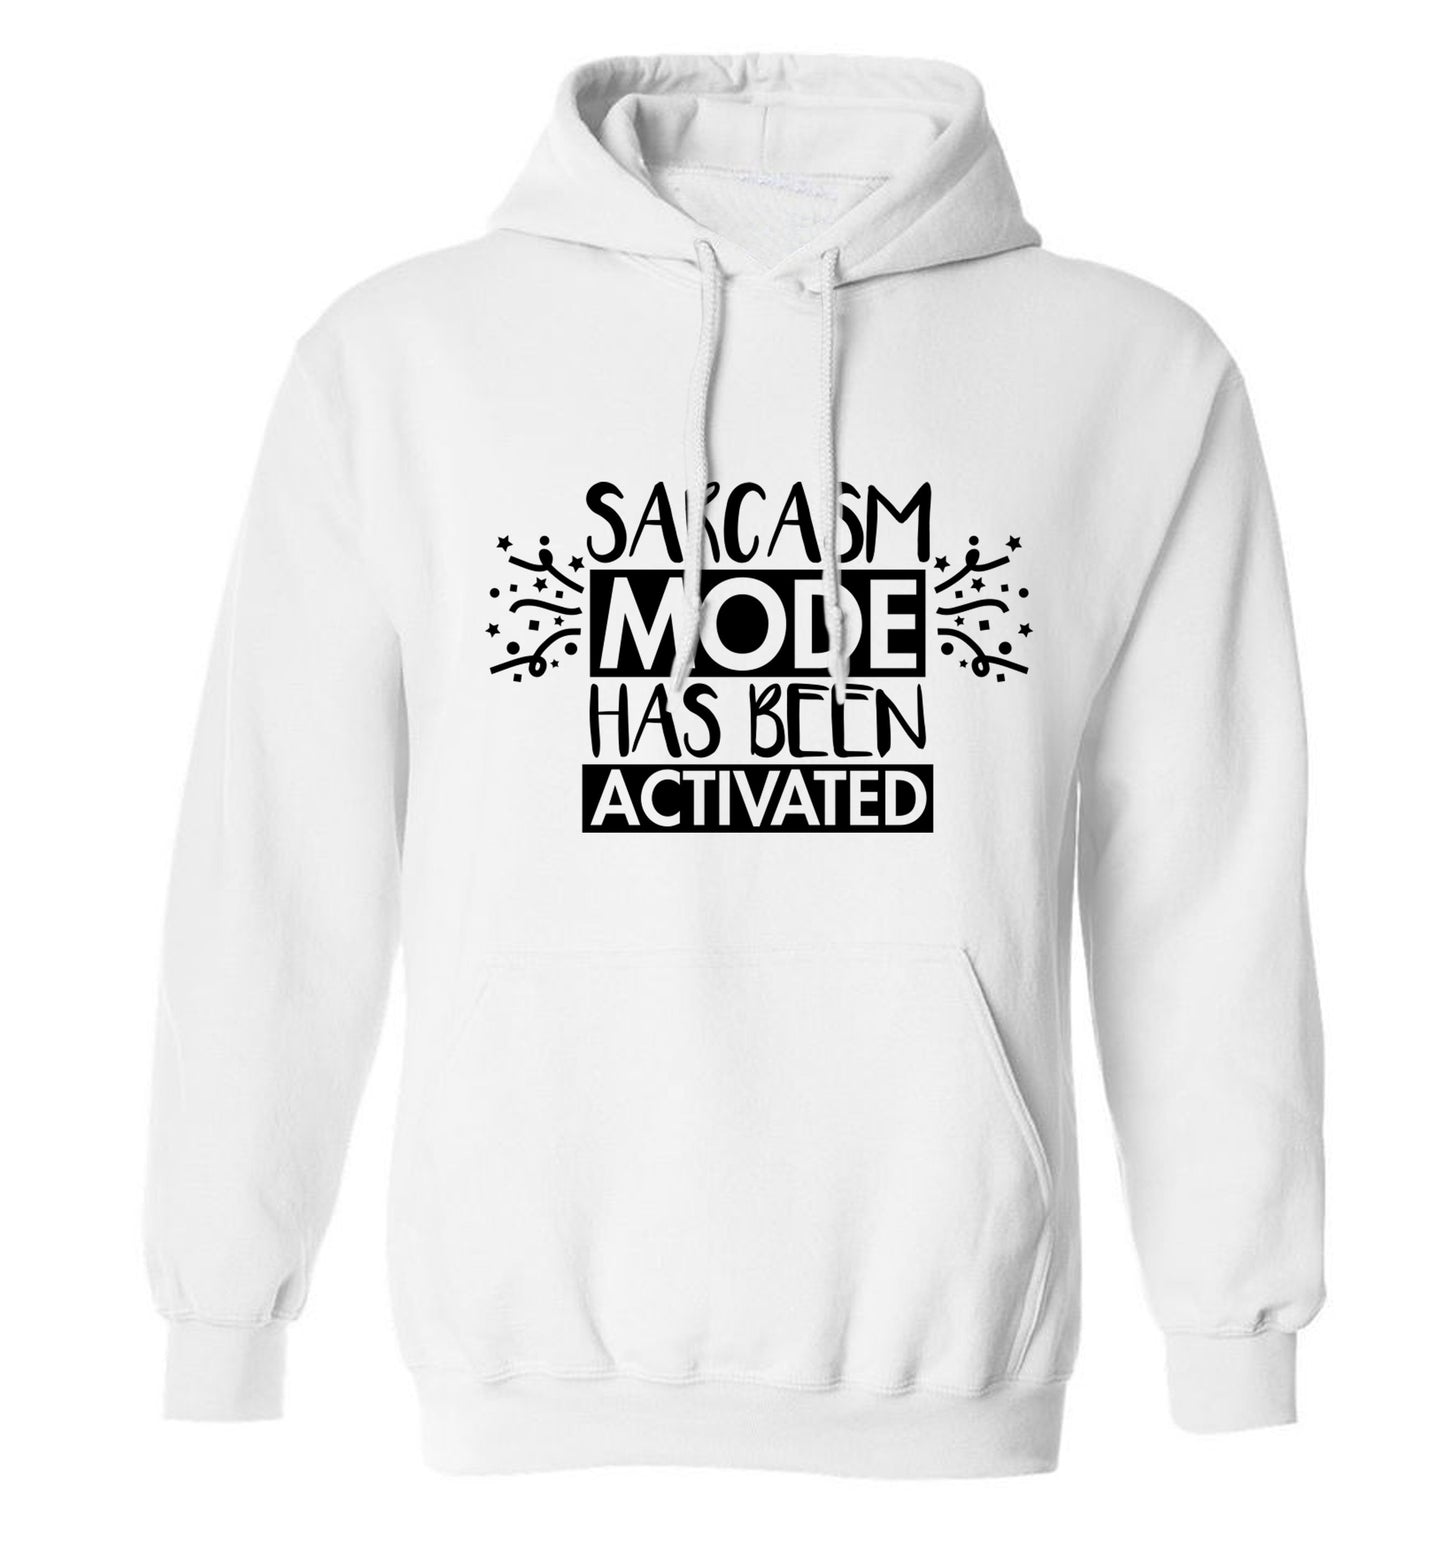 Sarcarsm mode has been activated adults unisex white hoodie 2XL